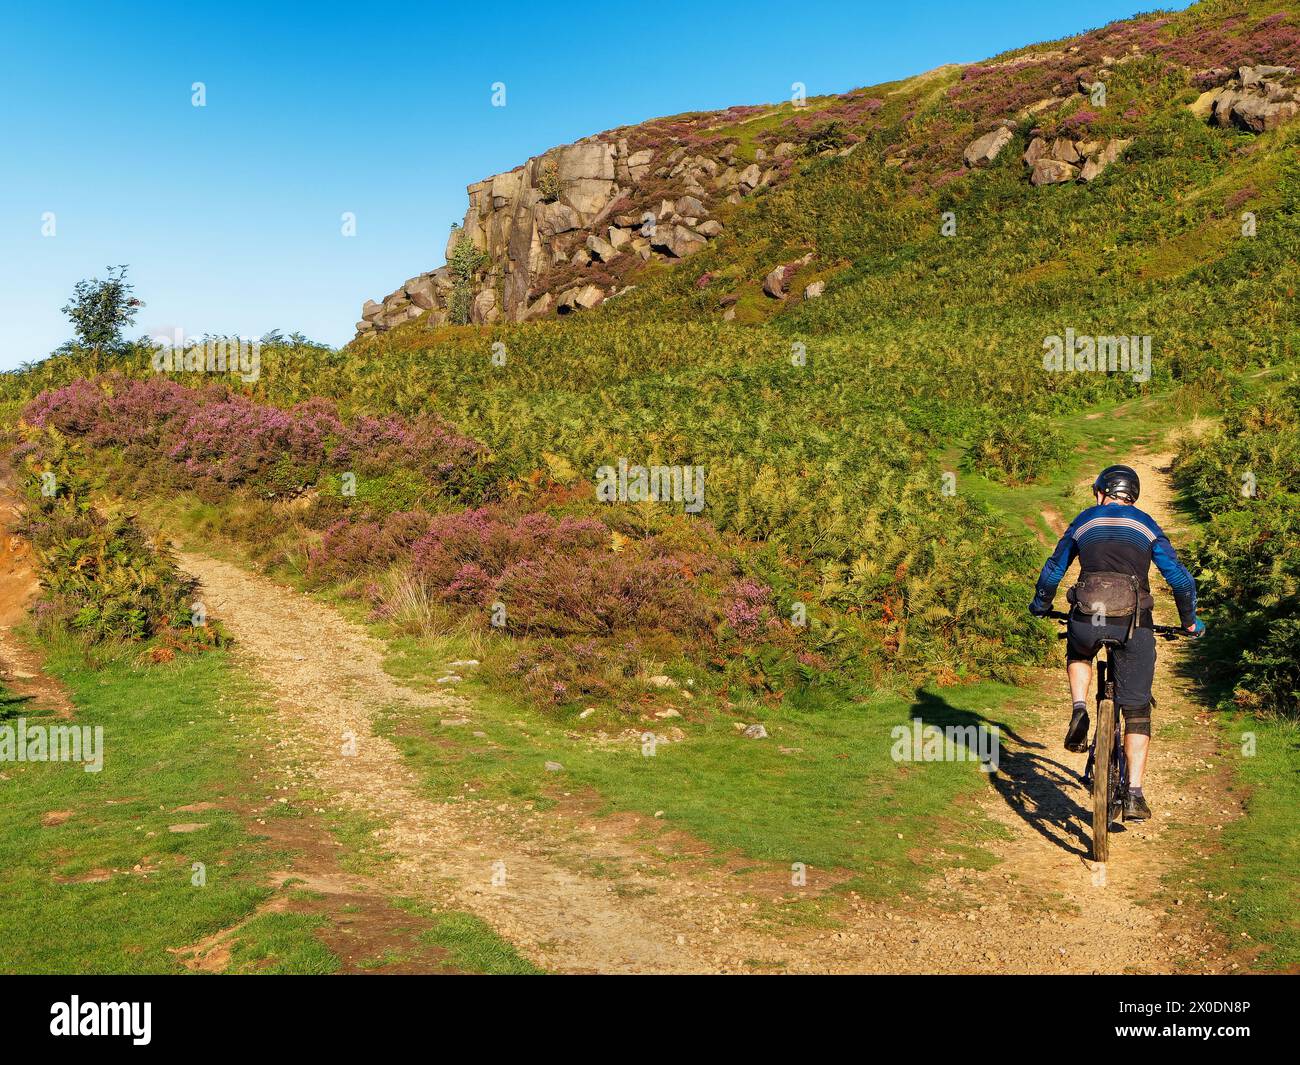 UK, West Yorkshire, Ilkley, Ilkley Moor, Footpaths through Rocky Valley and Ilkley Crags. Stock Photo